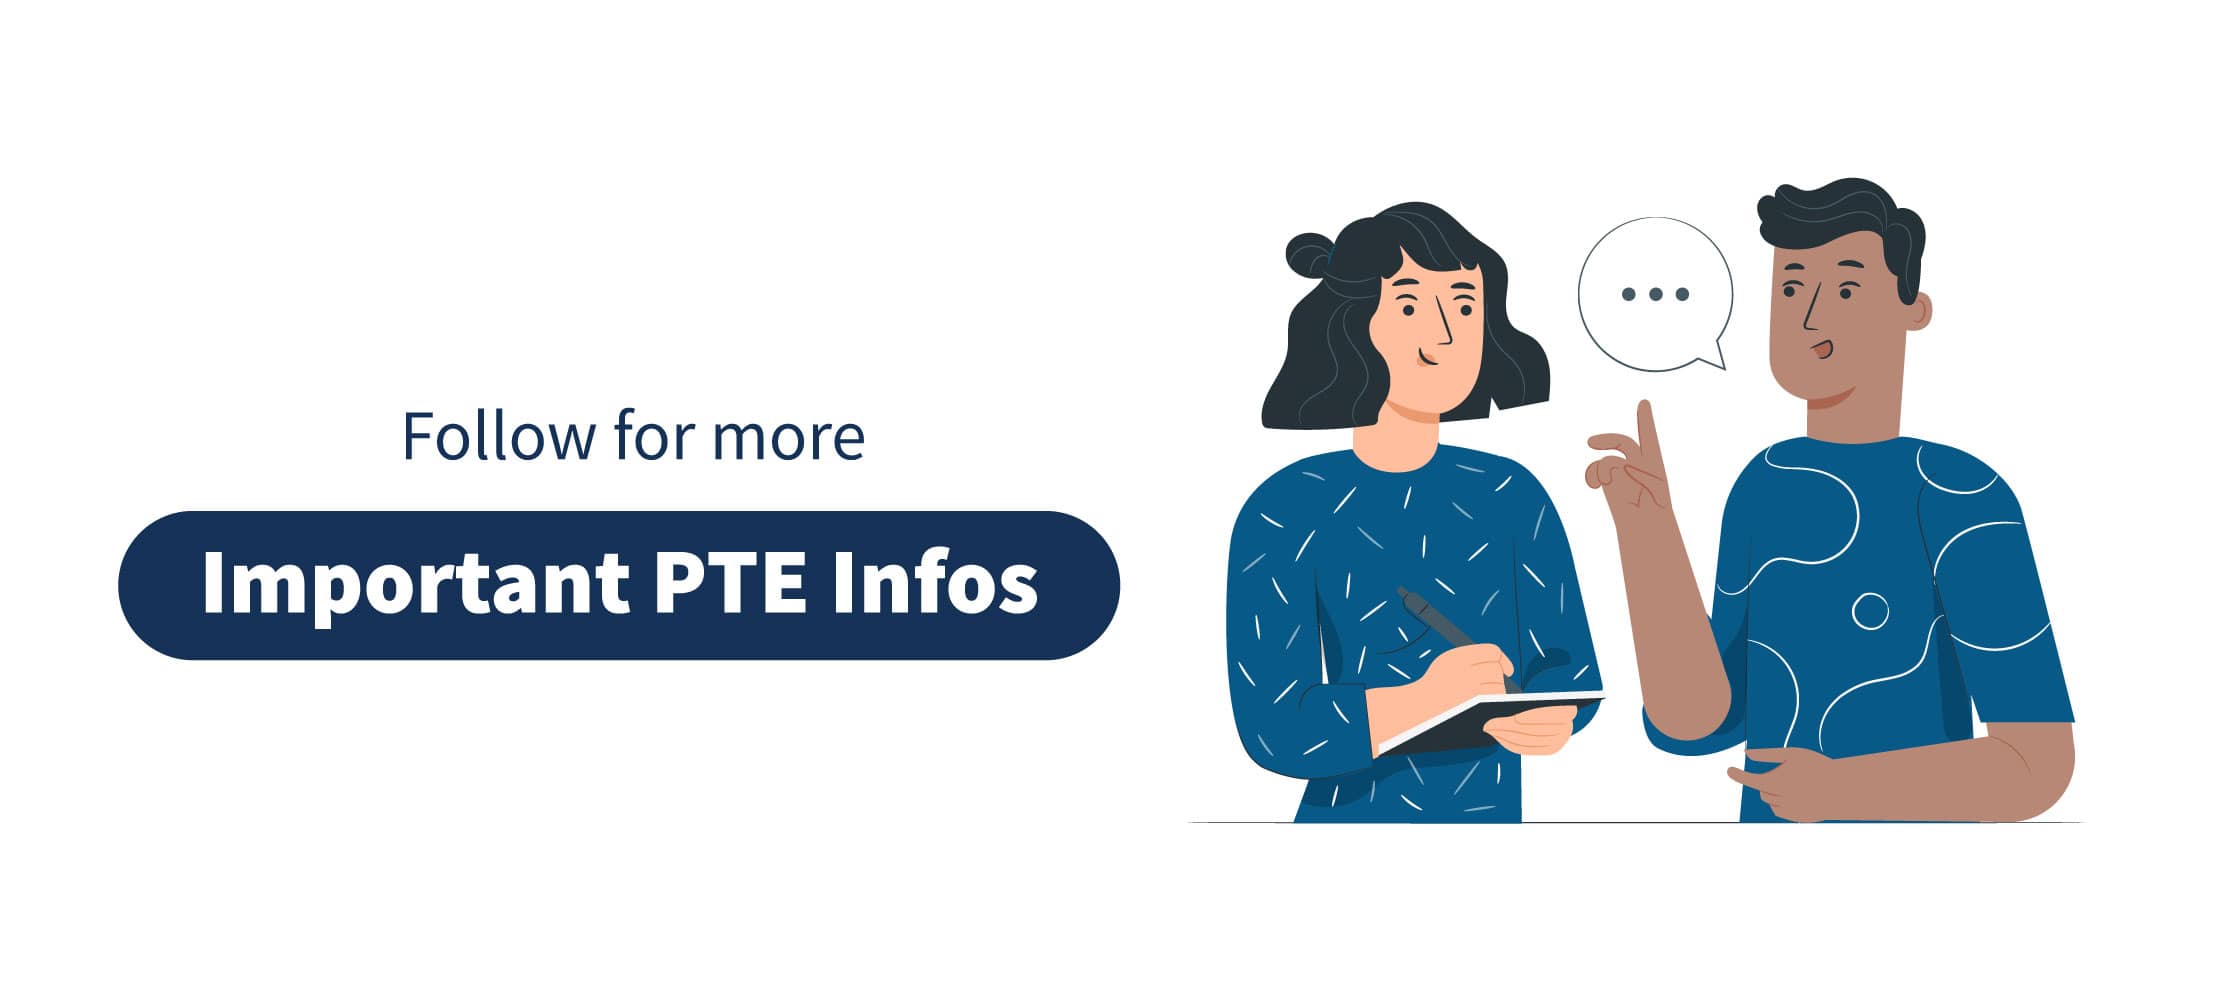 PTE and IELTS Info